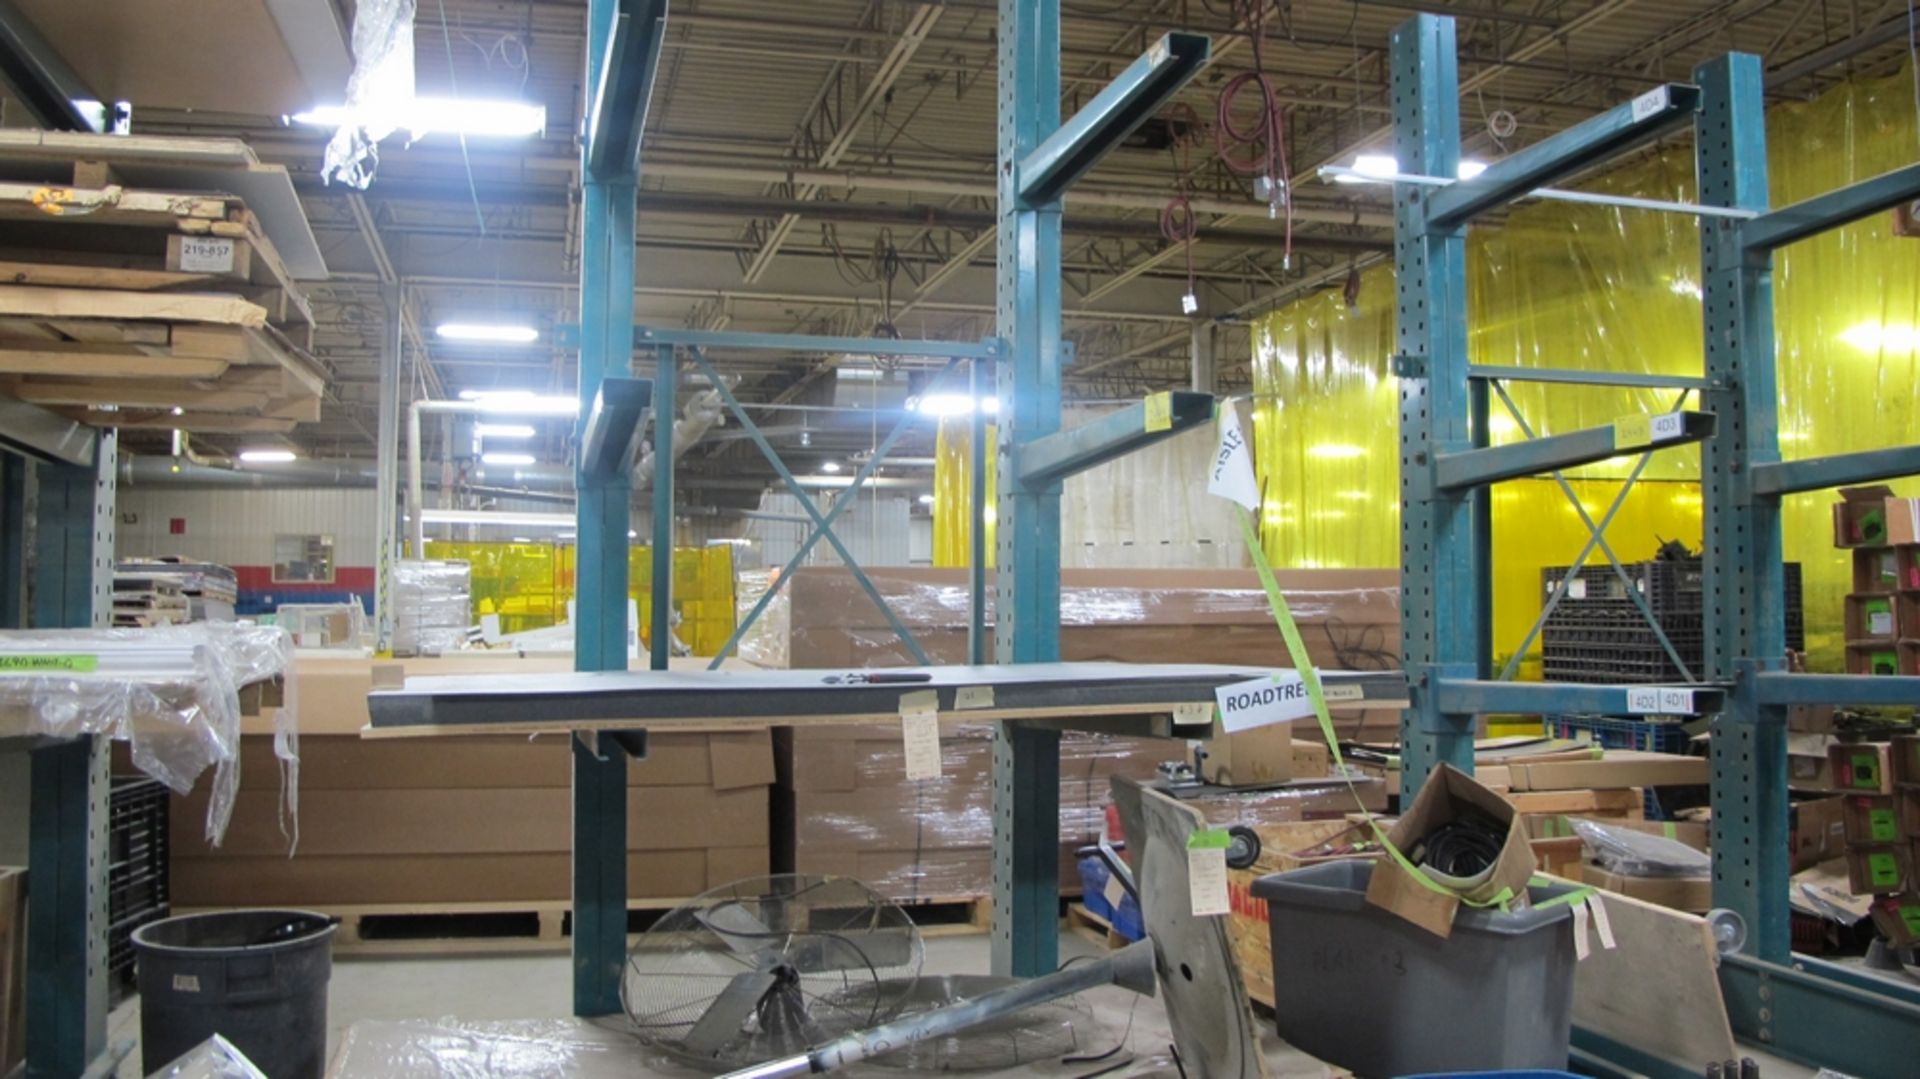 LOT OF CANTELEVER RACK, 4'W X 12'T (NO CONTENTS, DELAYED DELIVERY) (100 SHIRLEY AVE KITCHENER)